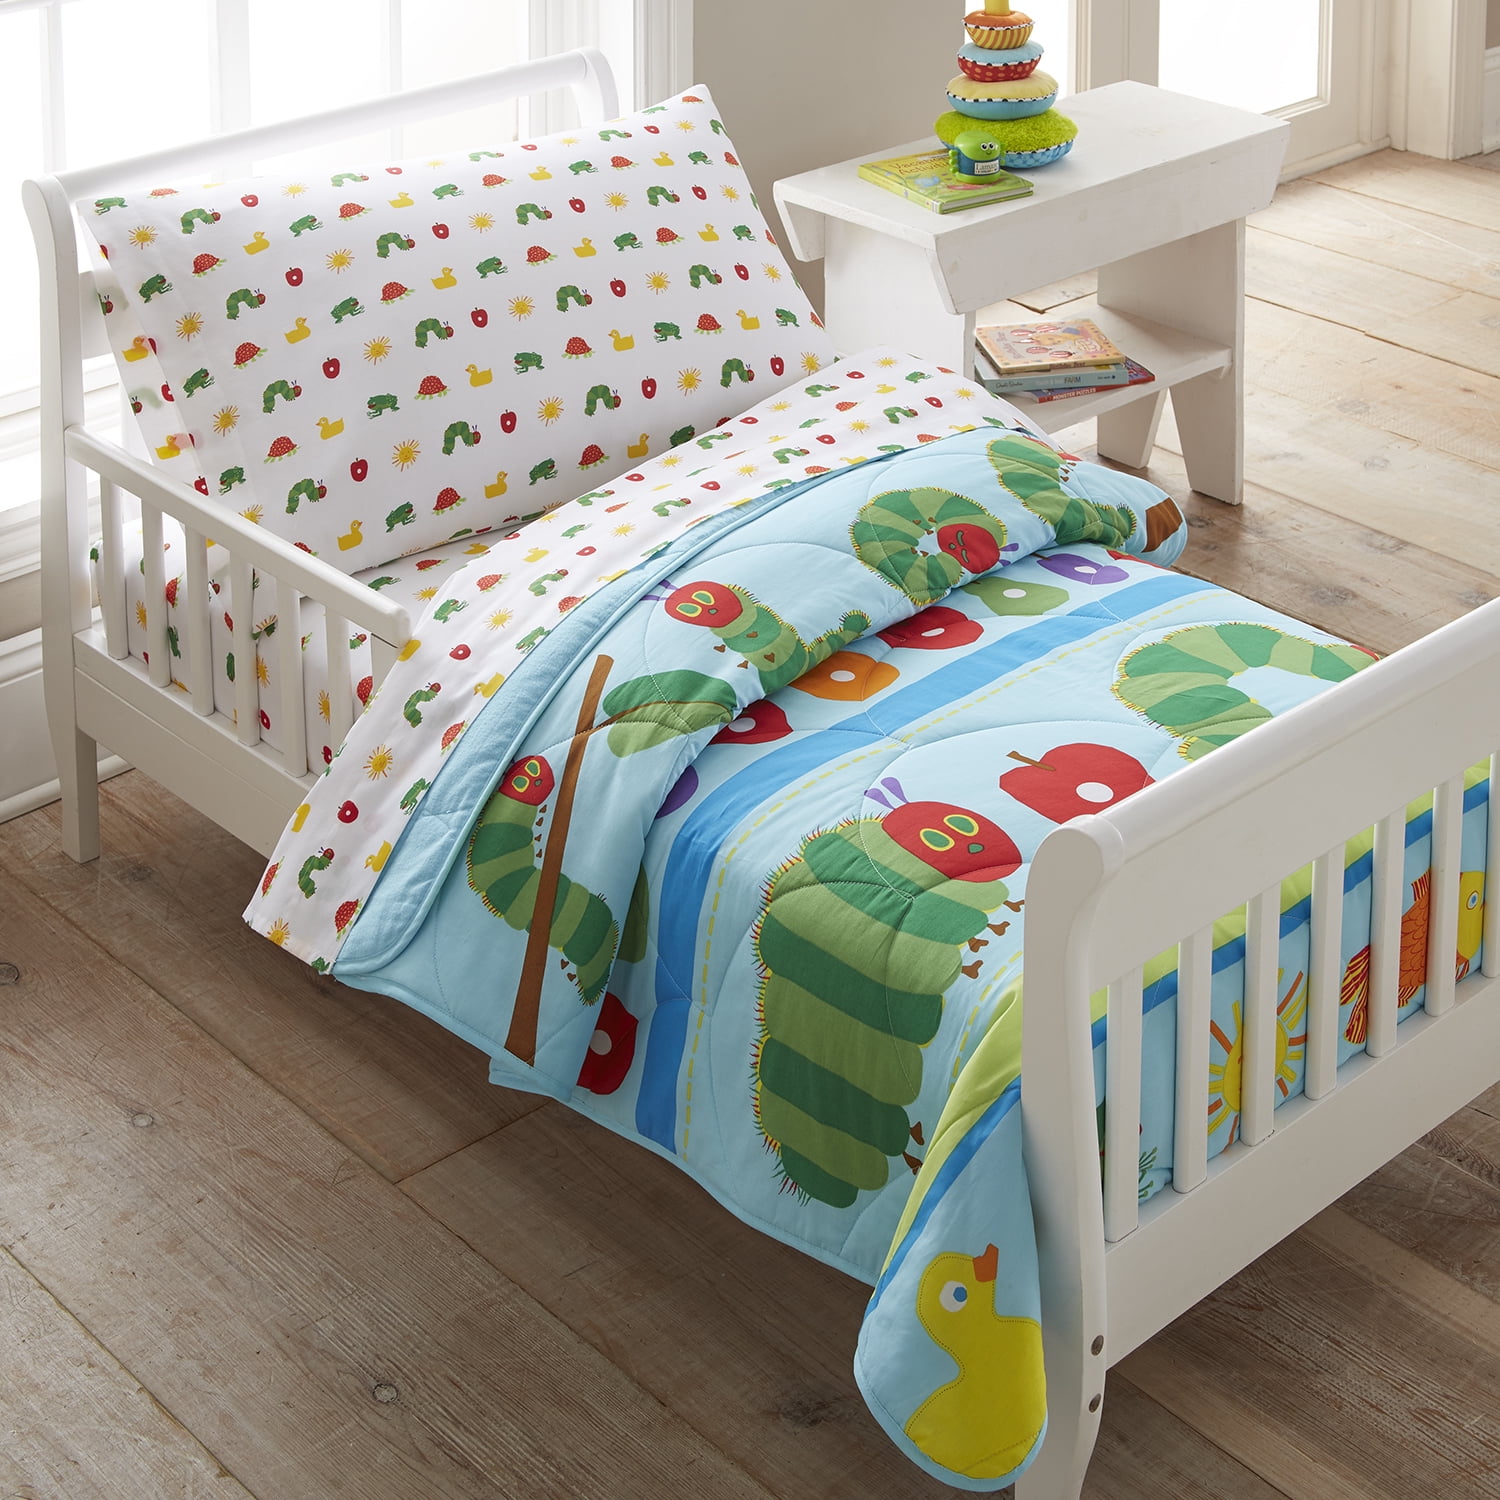 Pottery Barn Kids The Very Hungry Caterpillar Toddler Sheet Set NLA NWT 